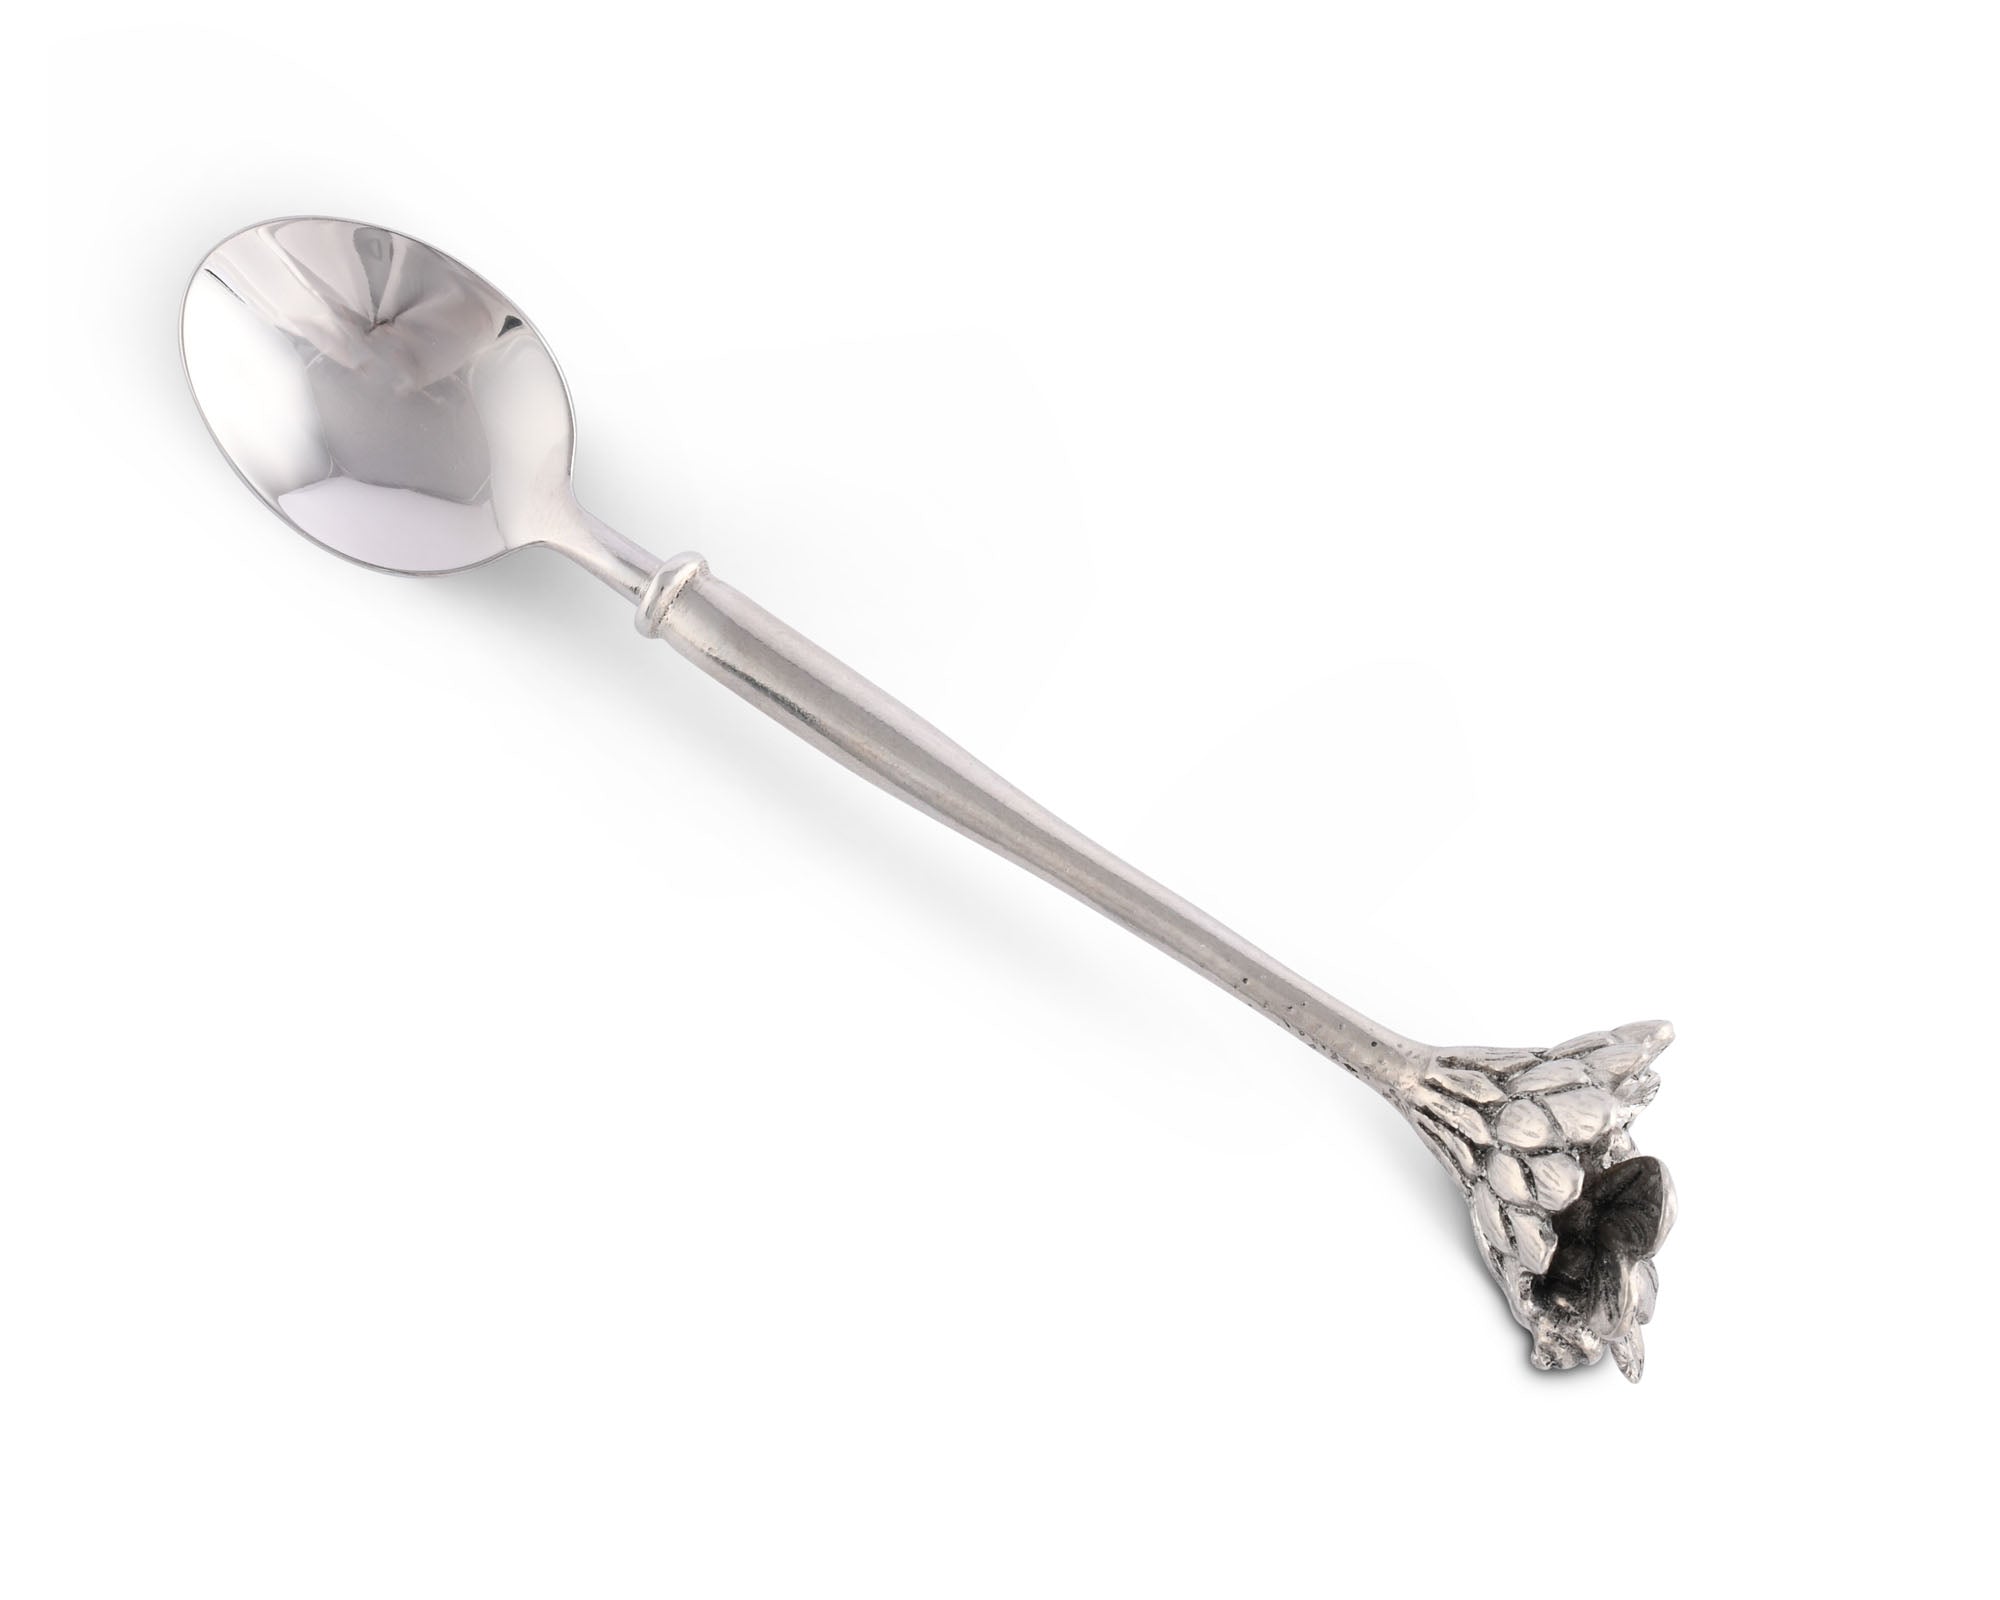 Vagabond House Daisy and Bee Spoon Product Image